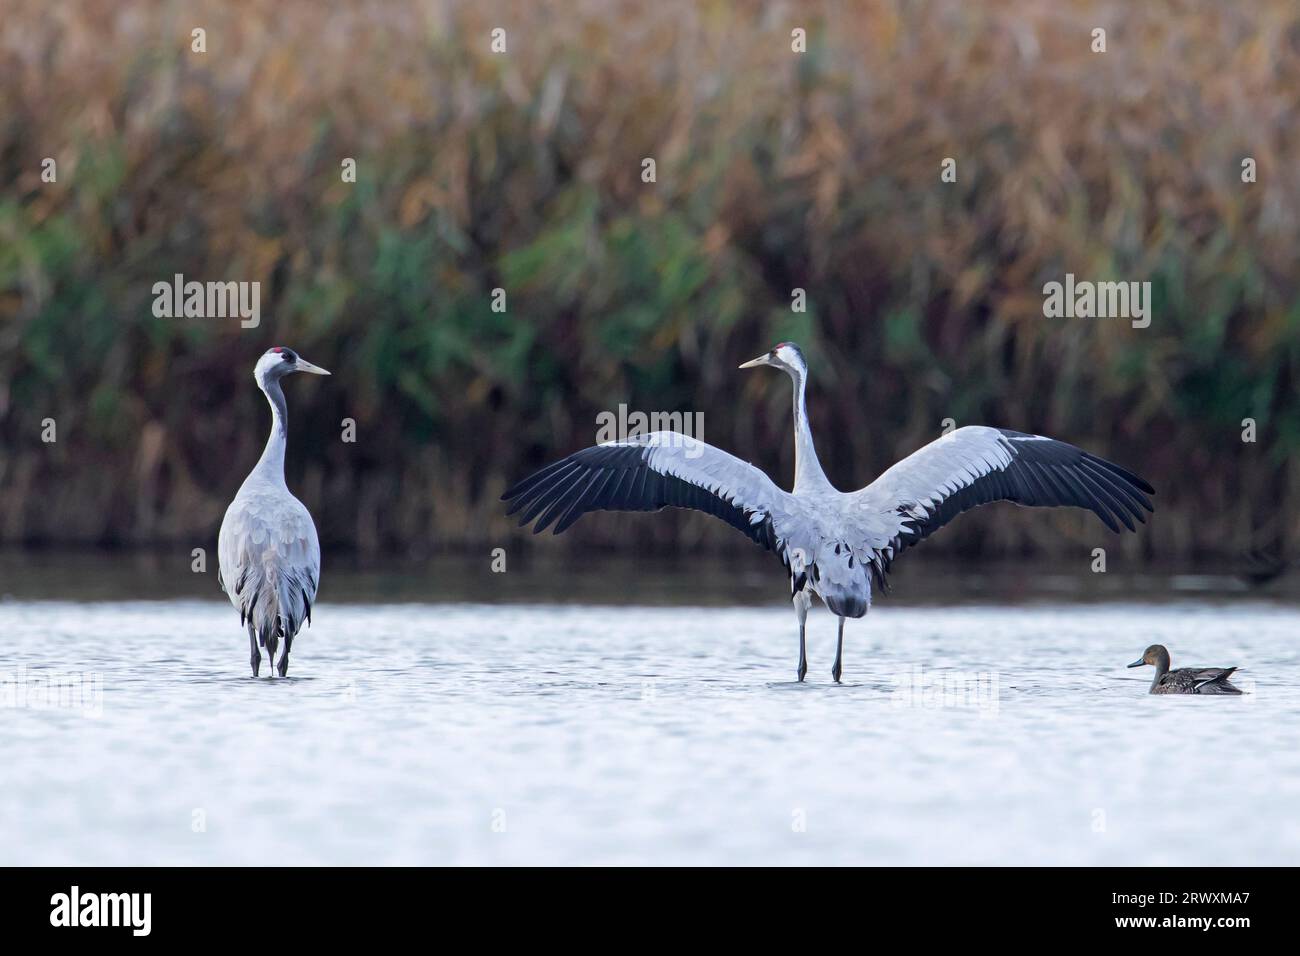 Two common cranes / Eurasian crane (Grus grus) pair resting in shallow water at roosting site in autumn / fall, Mecklenburg-Vorpommern, Germany Stock Photo